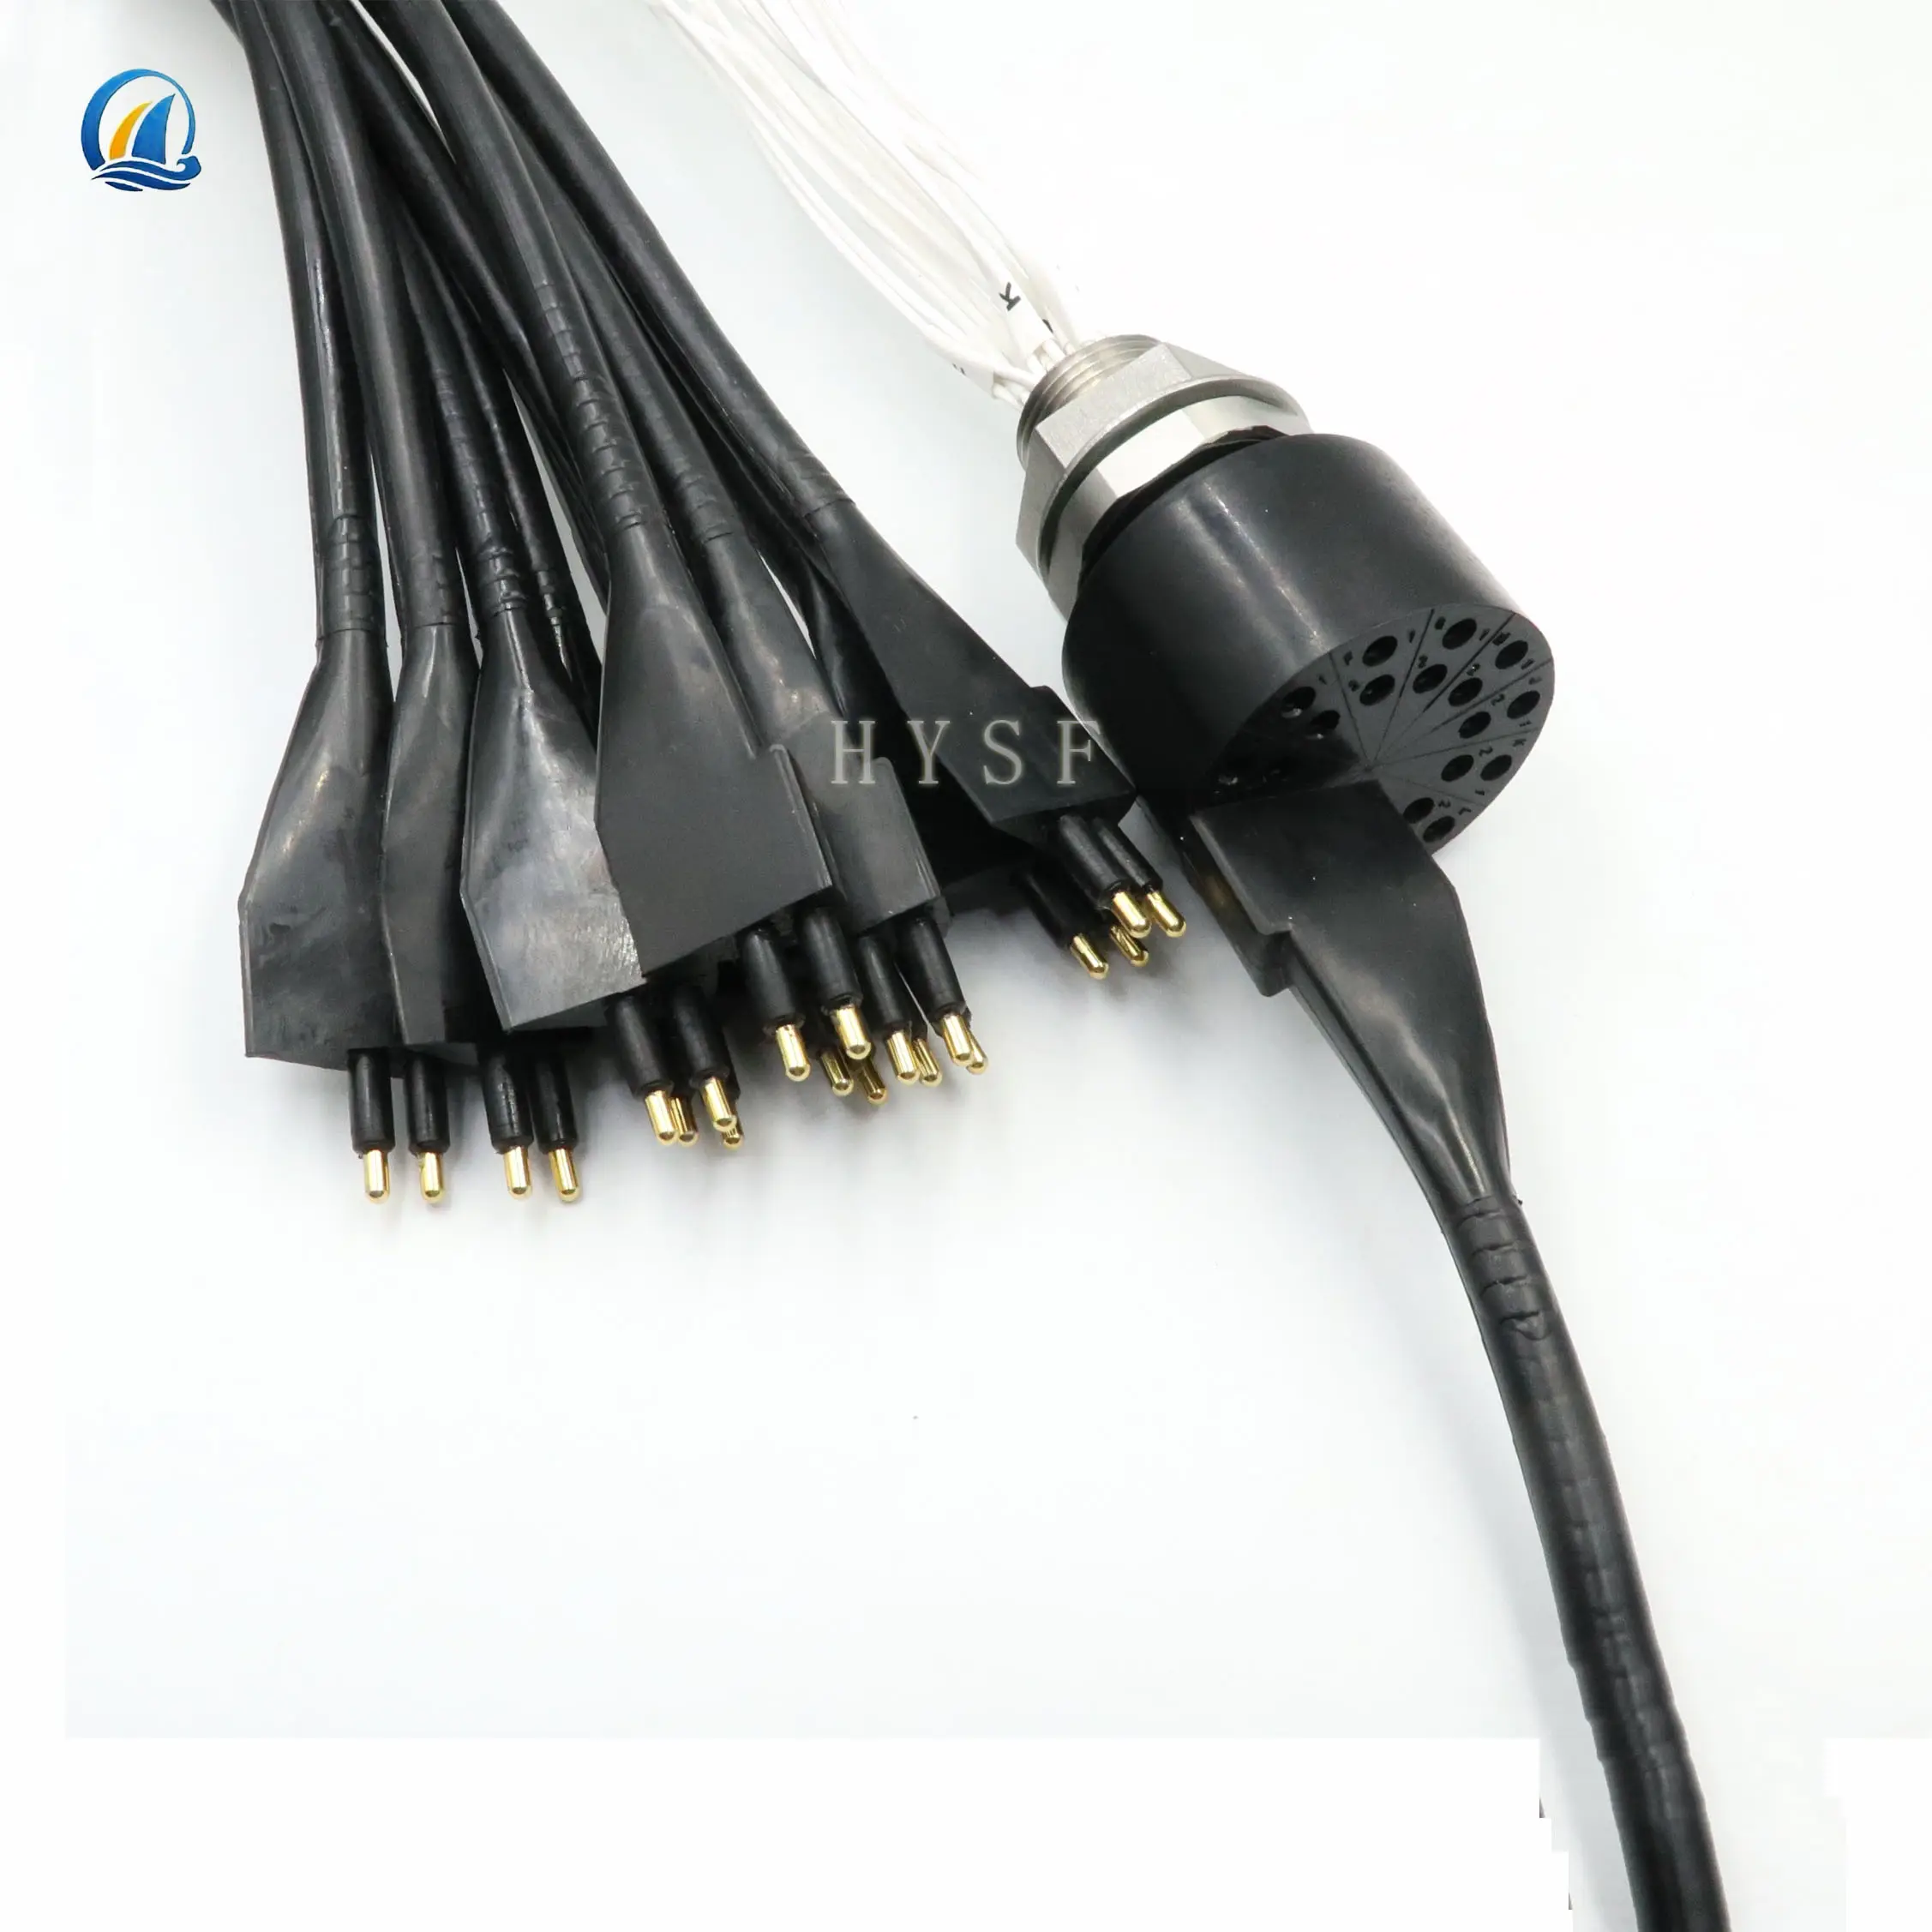 Multi core split 24pin waterproof male cable connector for customized underwater systems